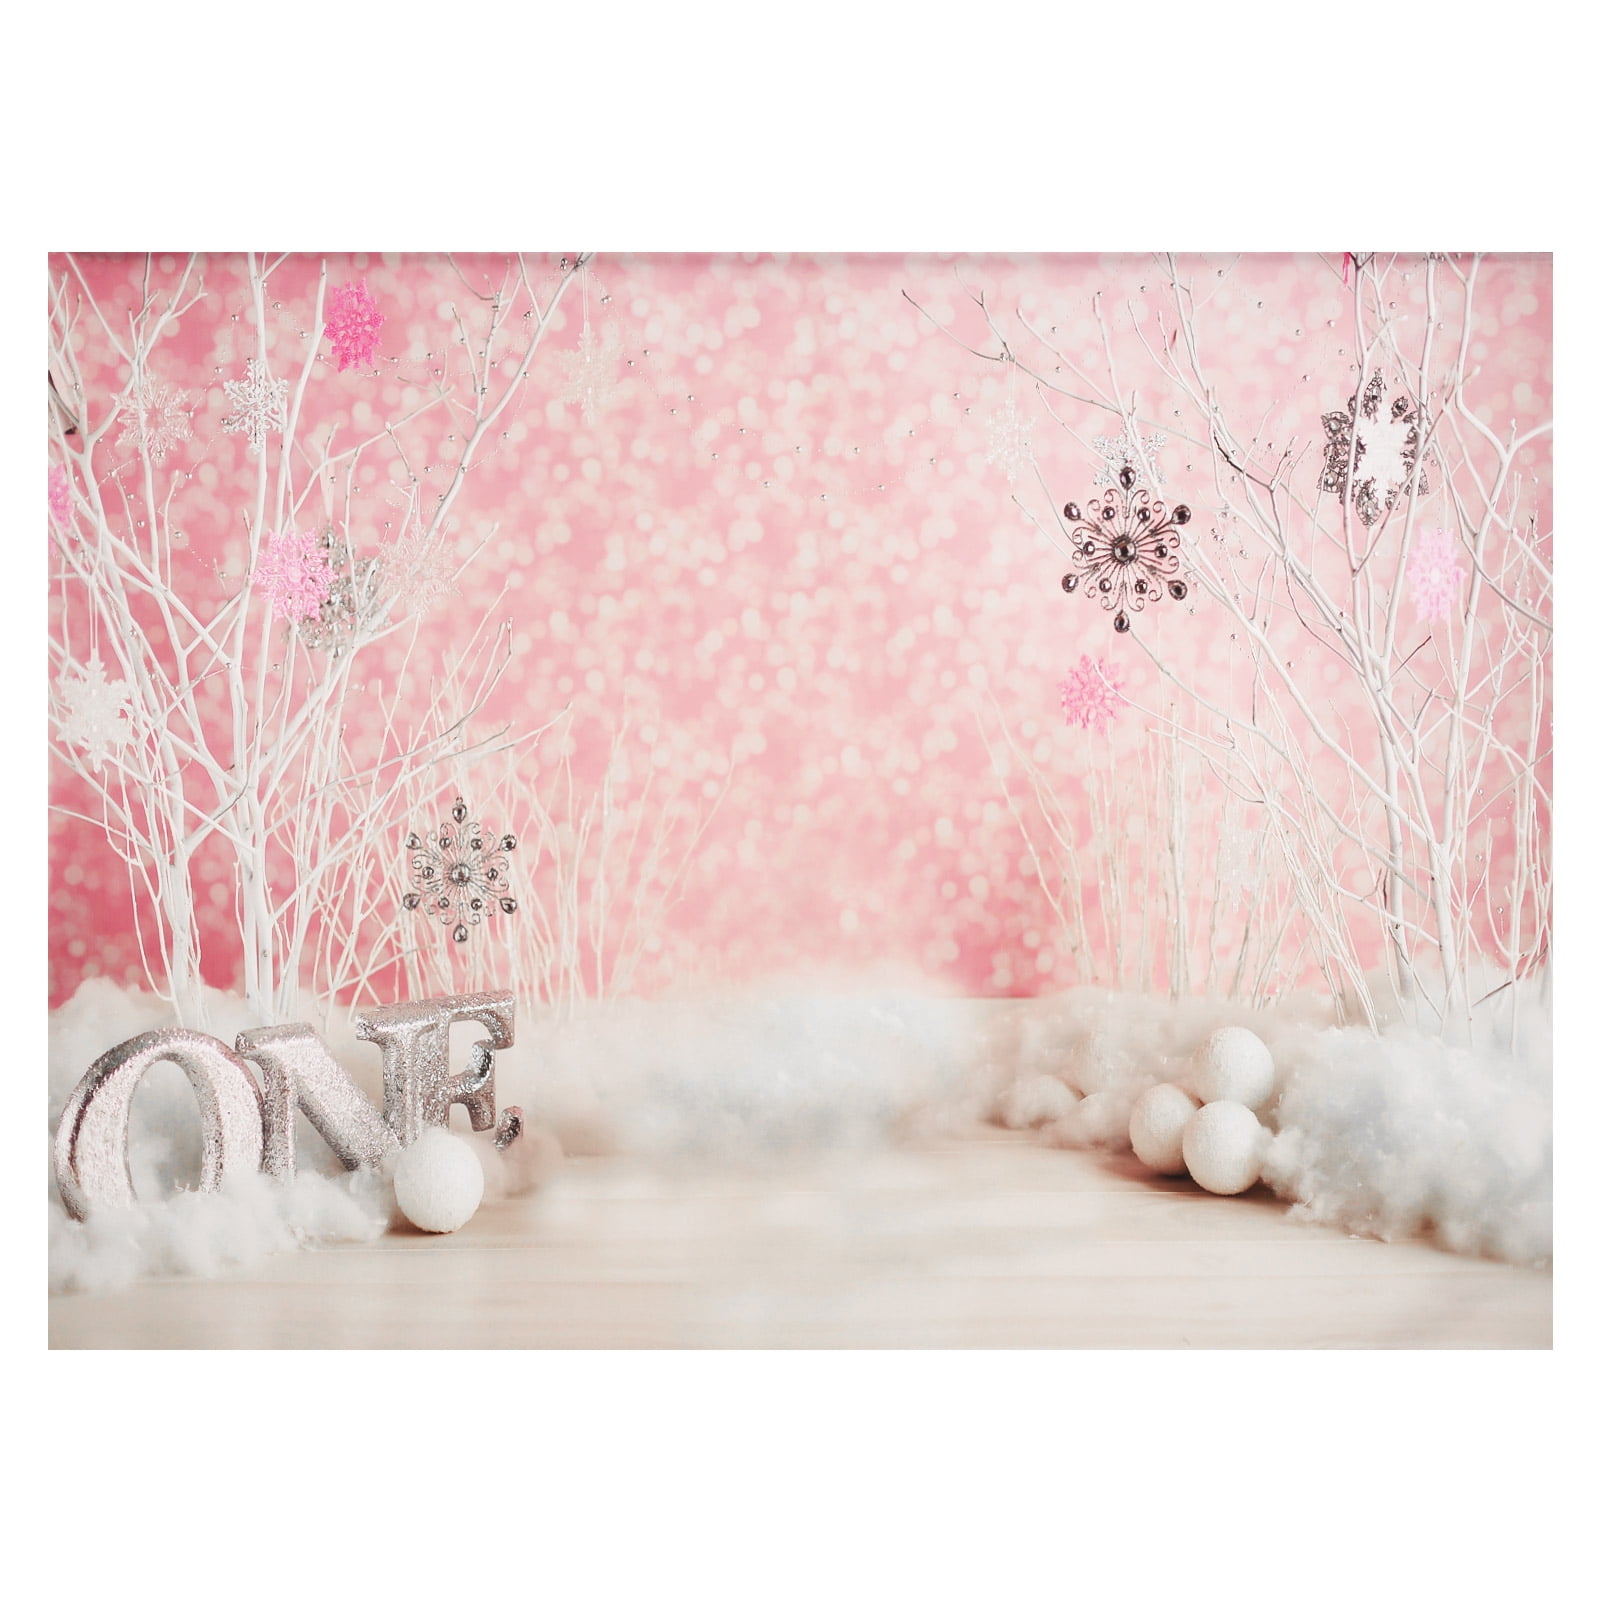 Docooler  *  7 * 5ft Photography Background Photography Backdrops  Pink Style Photo Studio Props for Baby Girl Photos Party Decoration -  